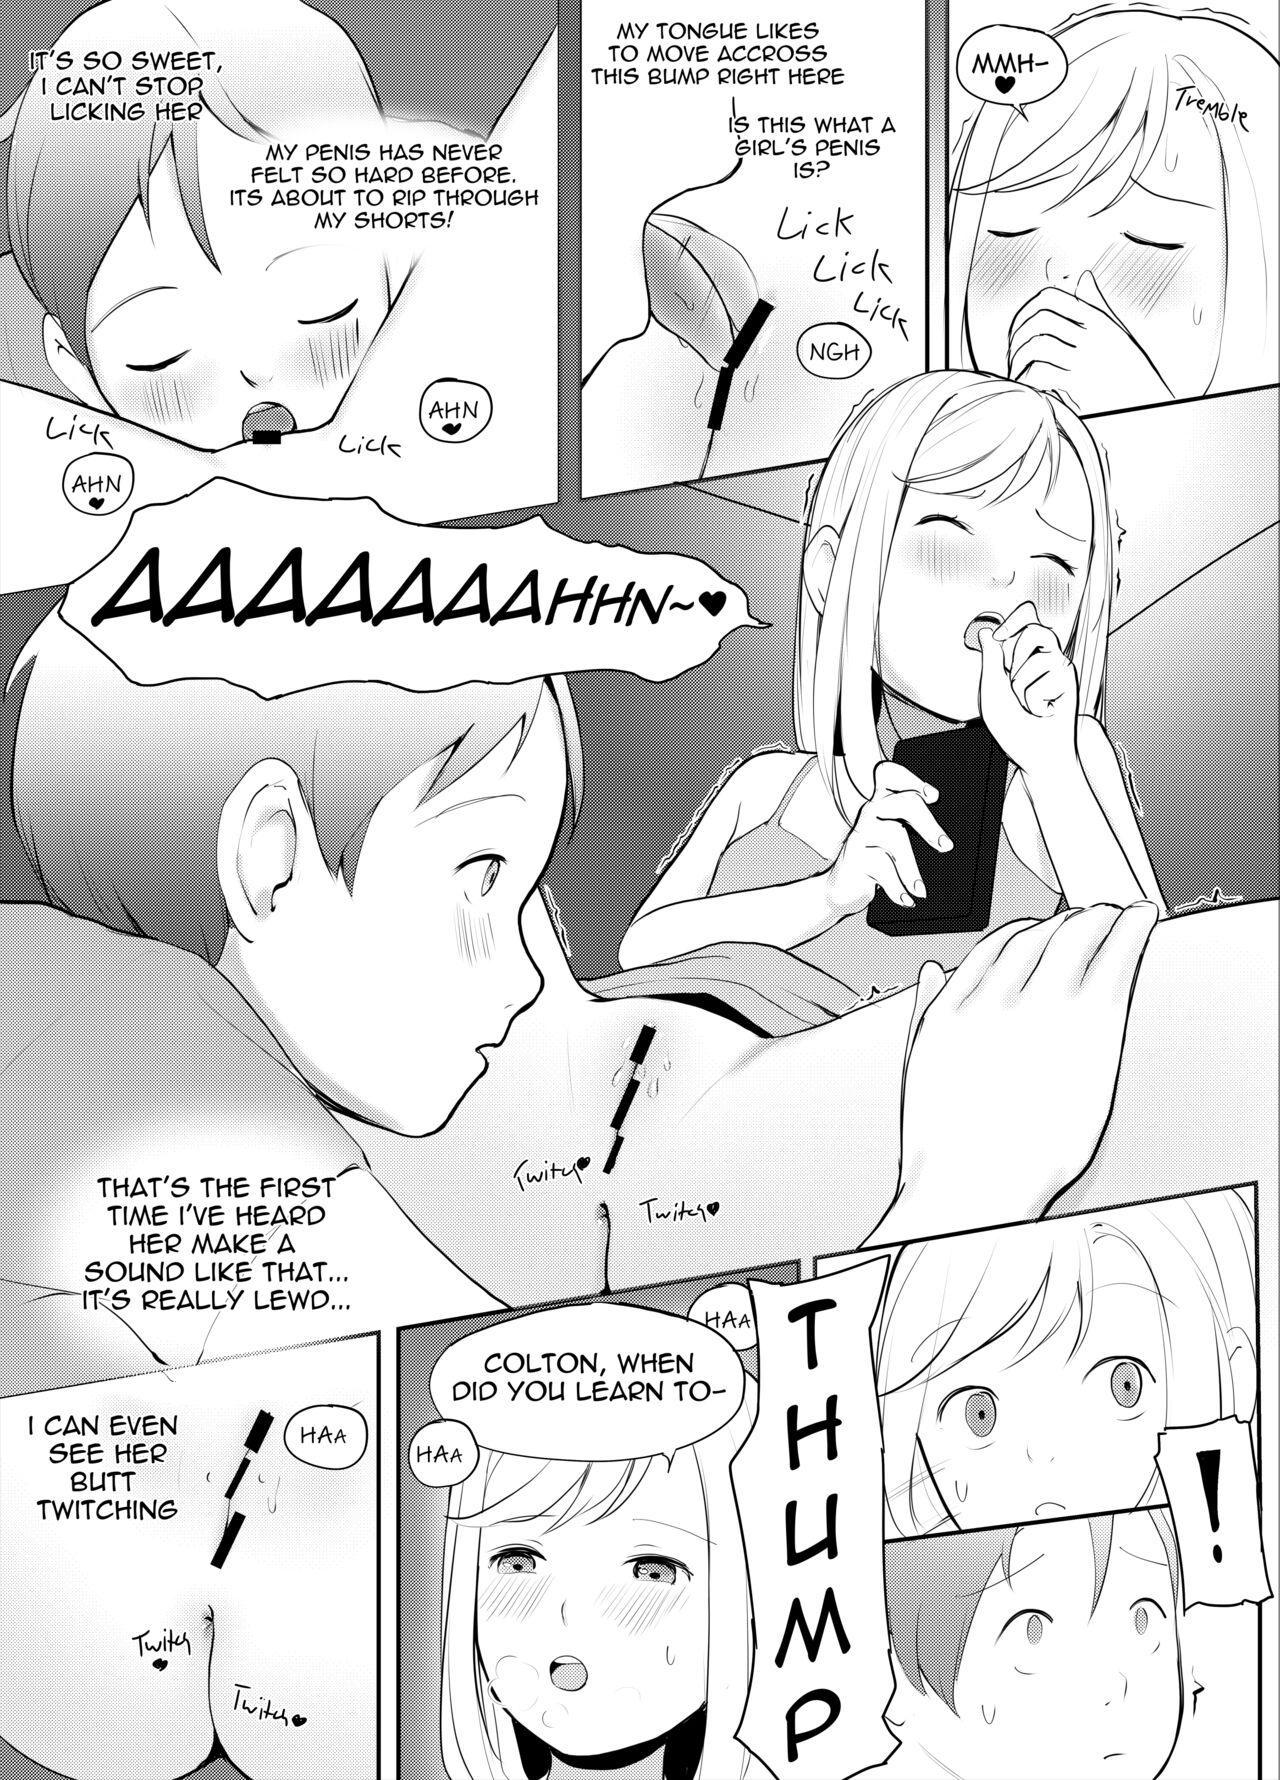 Desperate Passing the Time - Original Couples Fucking - Page 7